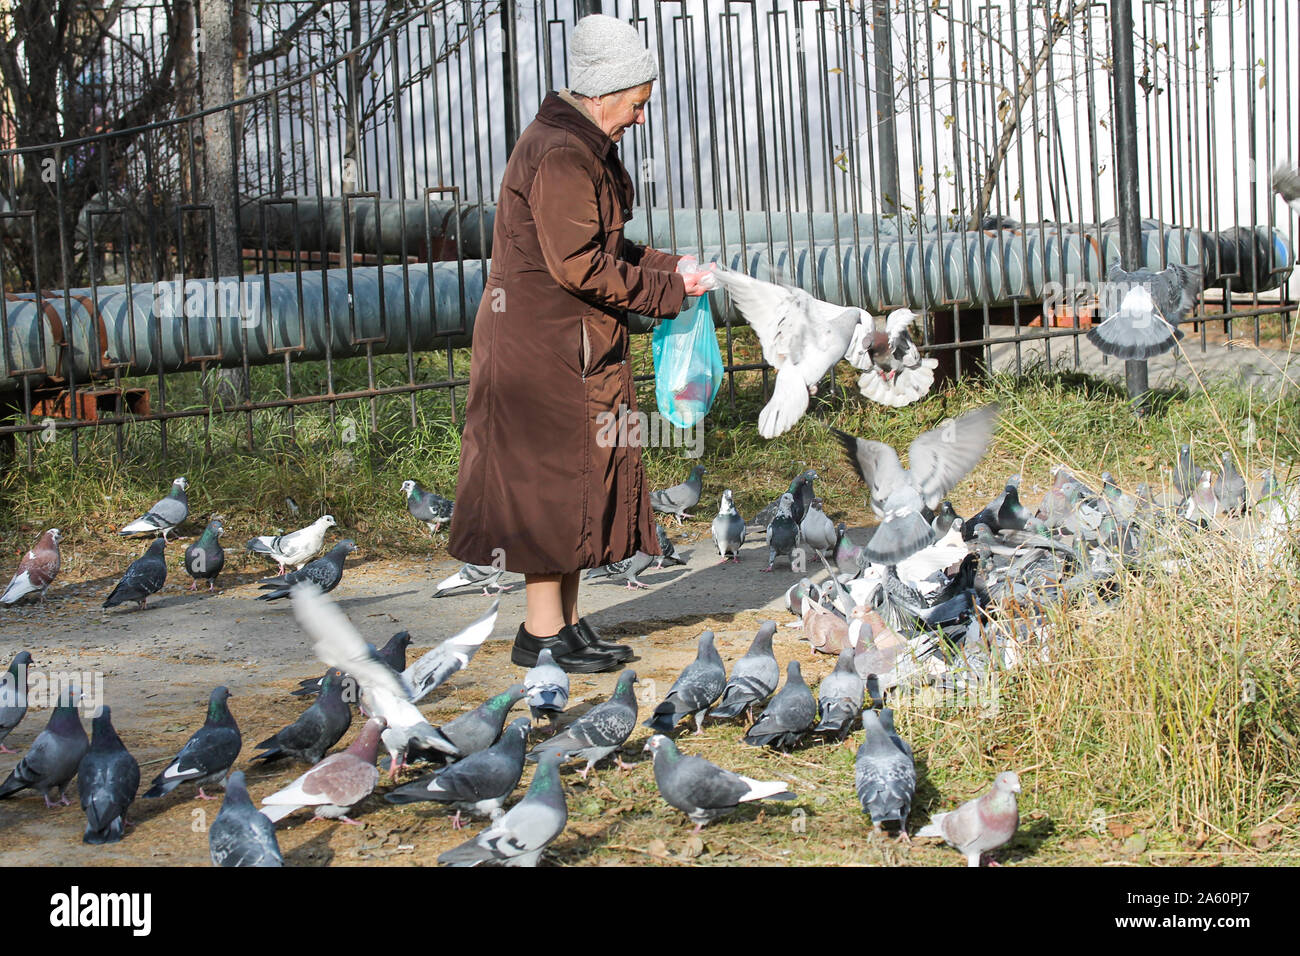 Magadan, Russia - October 17, 2019. Old lady feeding pigeons on the street. Kind woman giving food to city birds. Lots of birds eating birdseed or mil Stock Photo